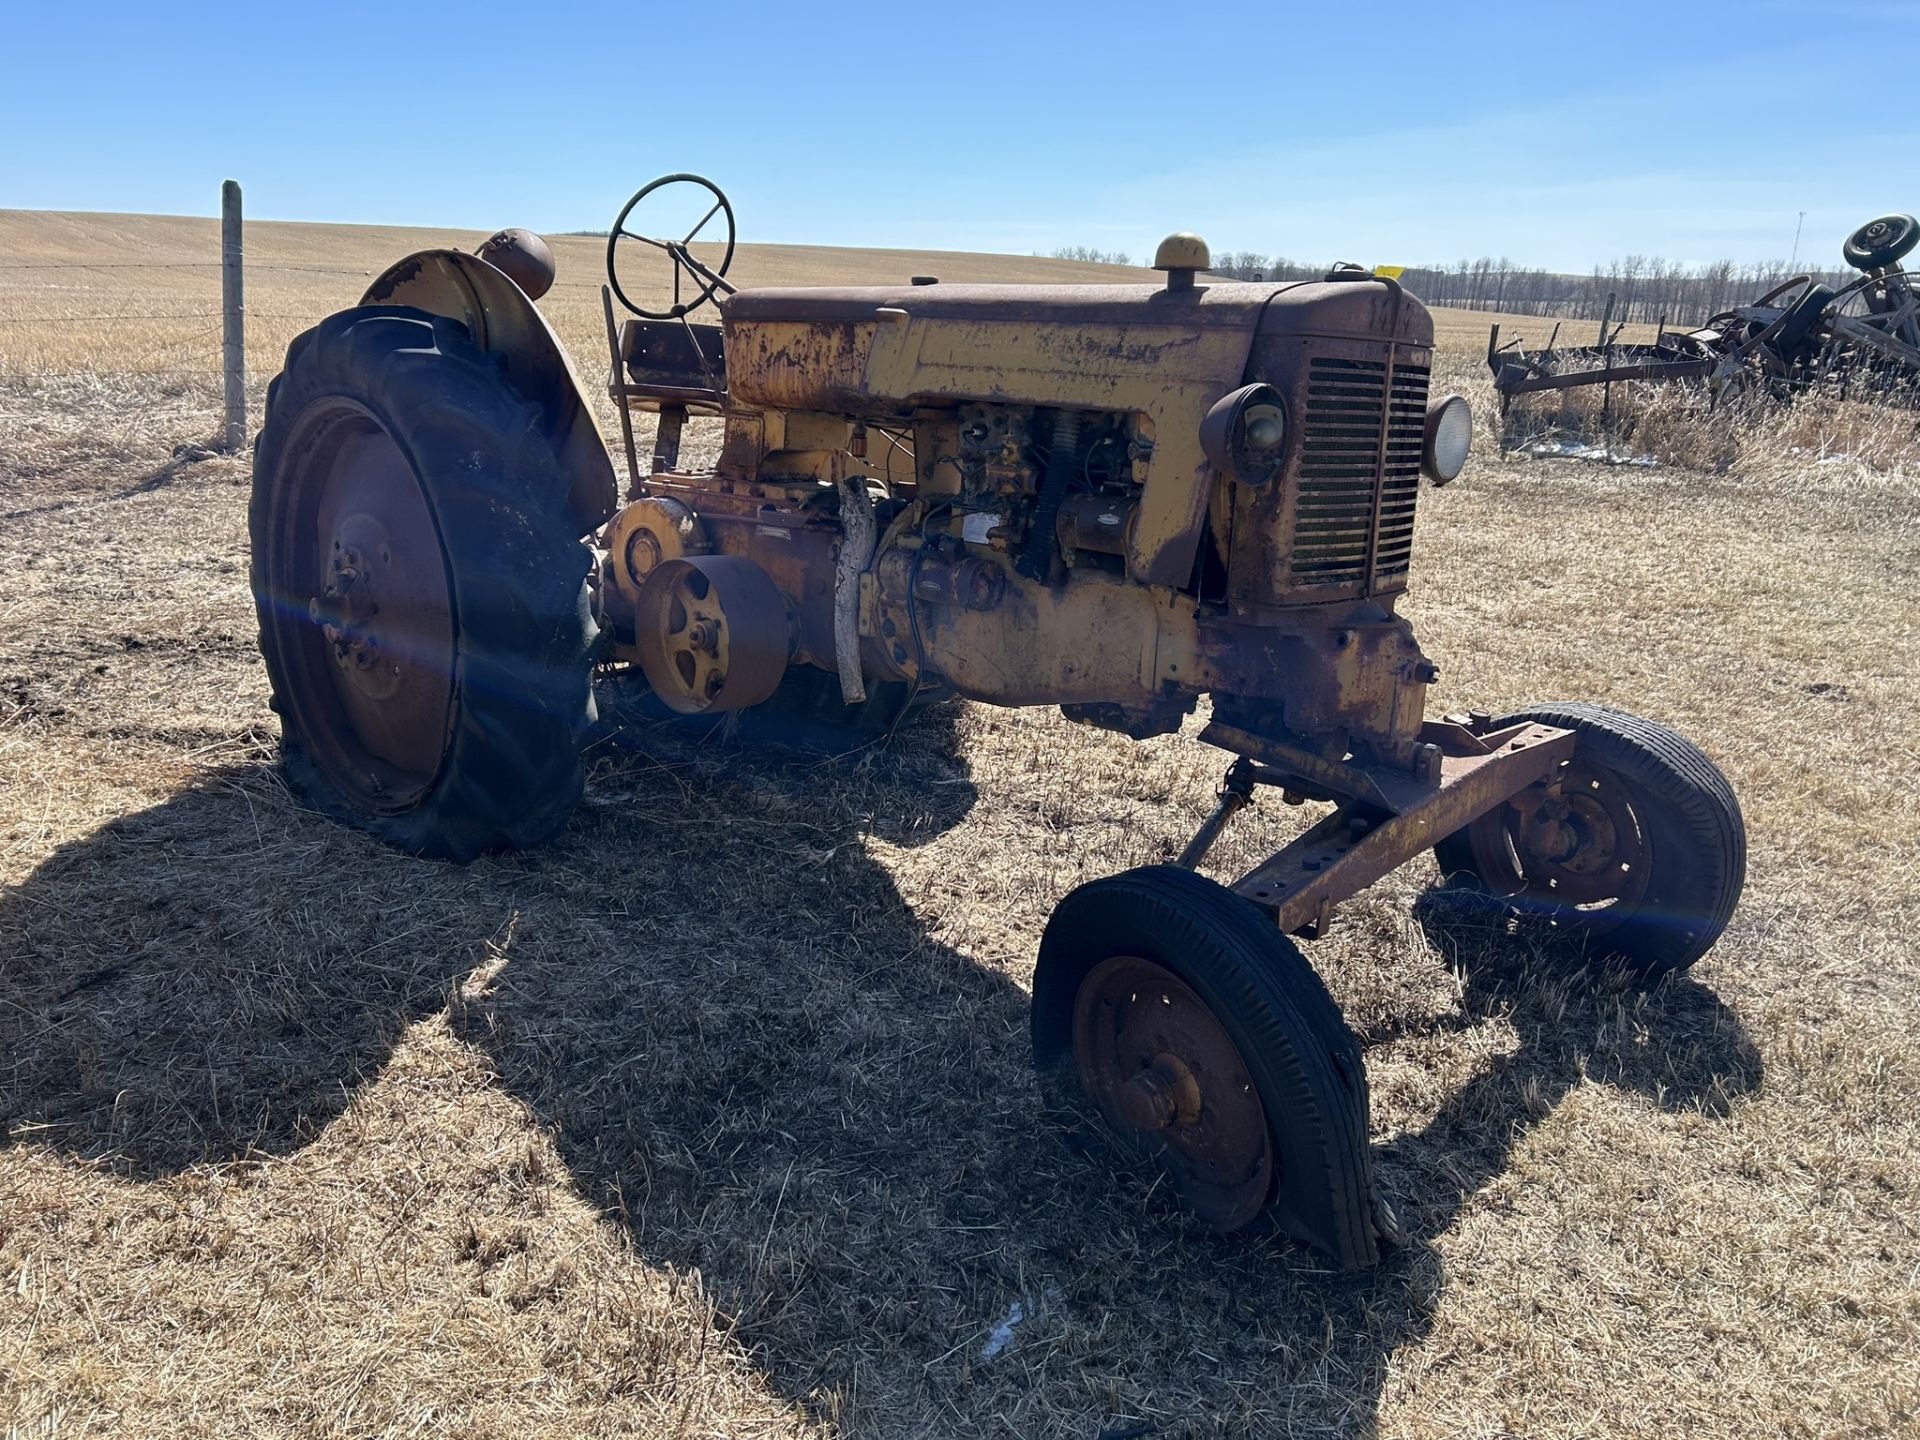 **OFFSITE** 1944 MINNEAPOLIS MOLINE MOD. 7AE TRACTOR S/N 0094900101 - LOCATED 40515 RANGE ROAD - Image 2 of 5